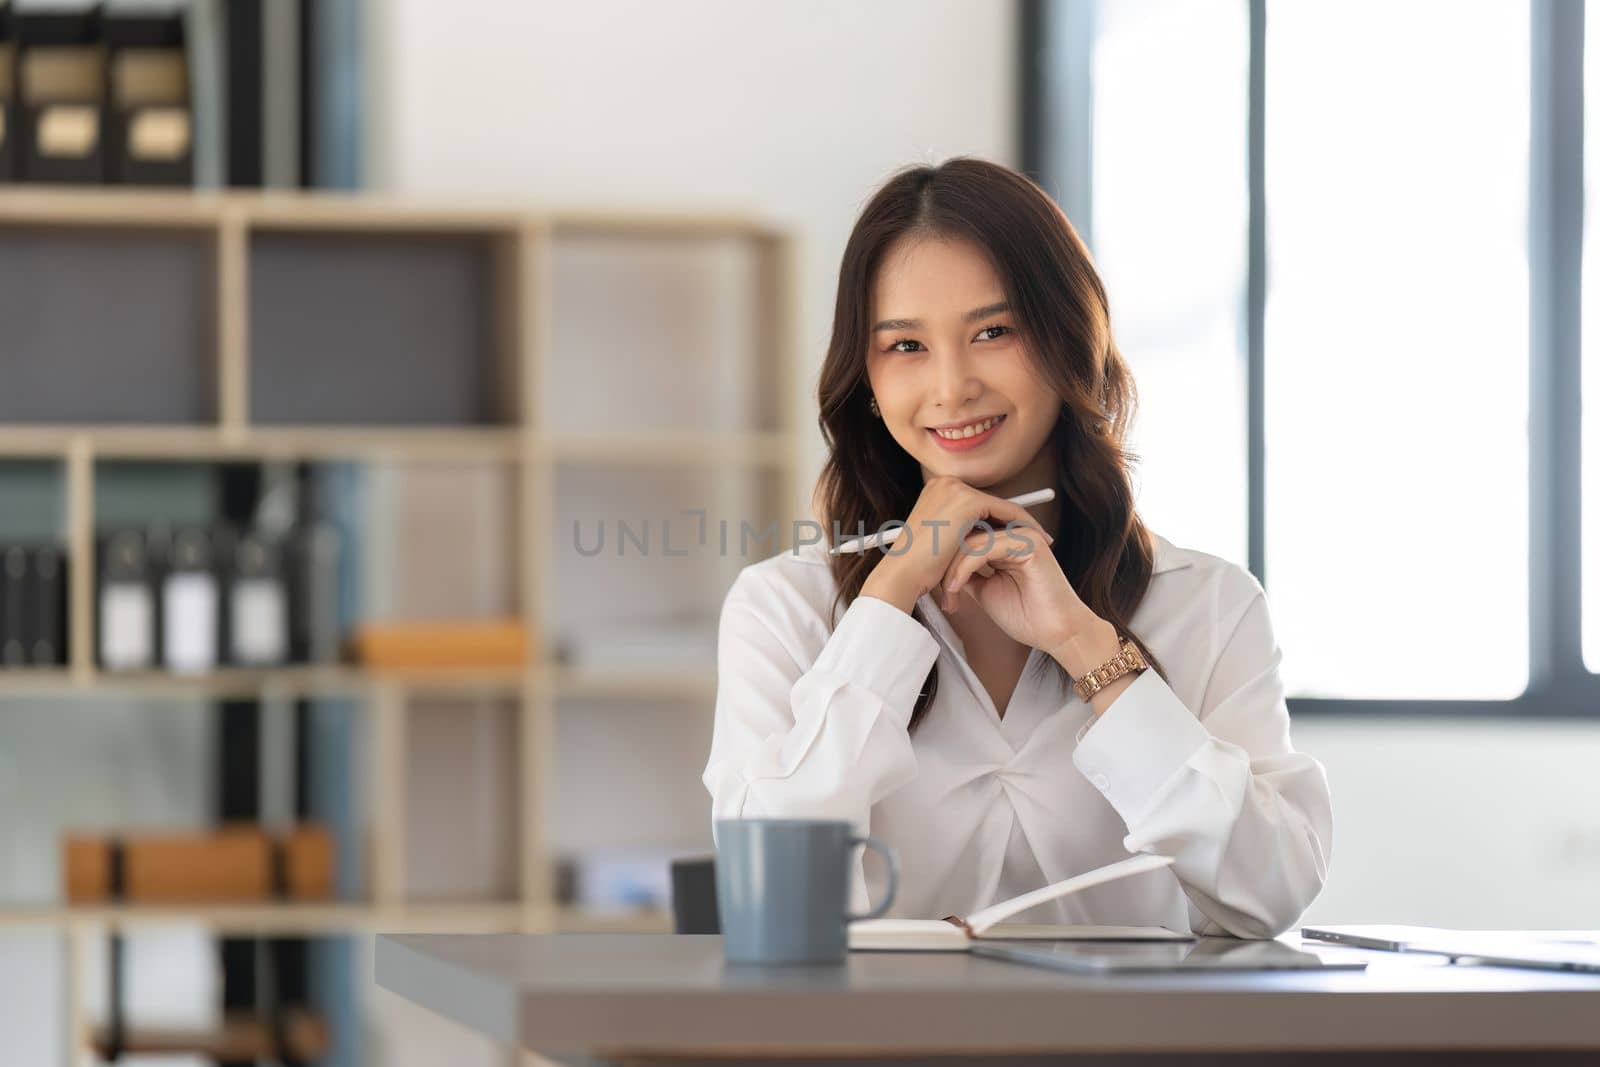 Young businesswoman working on laptop in office.